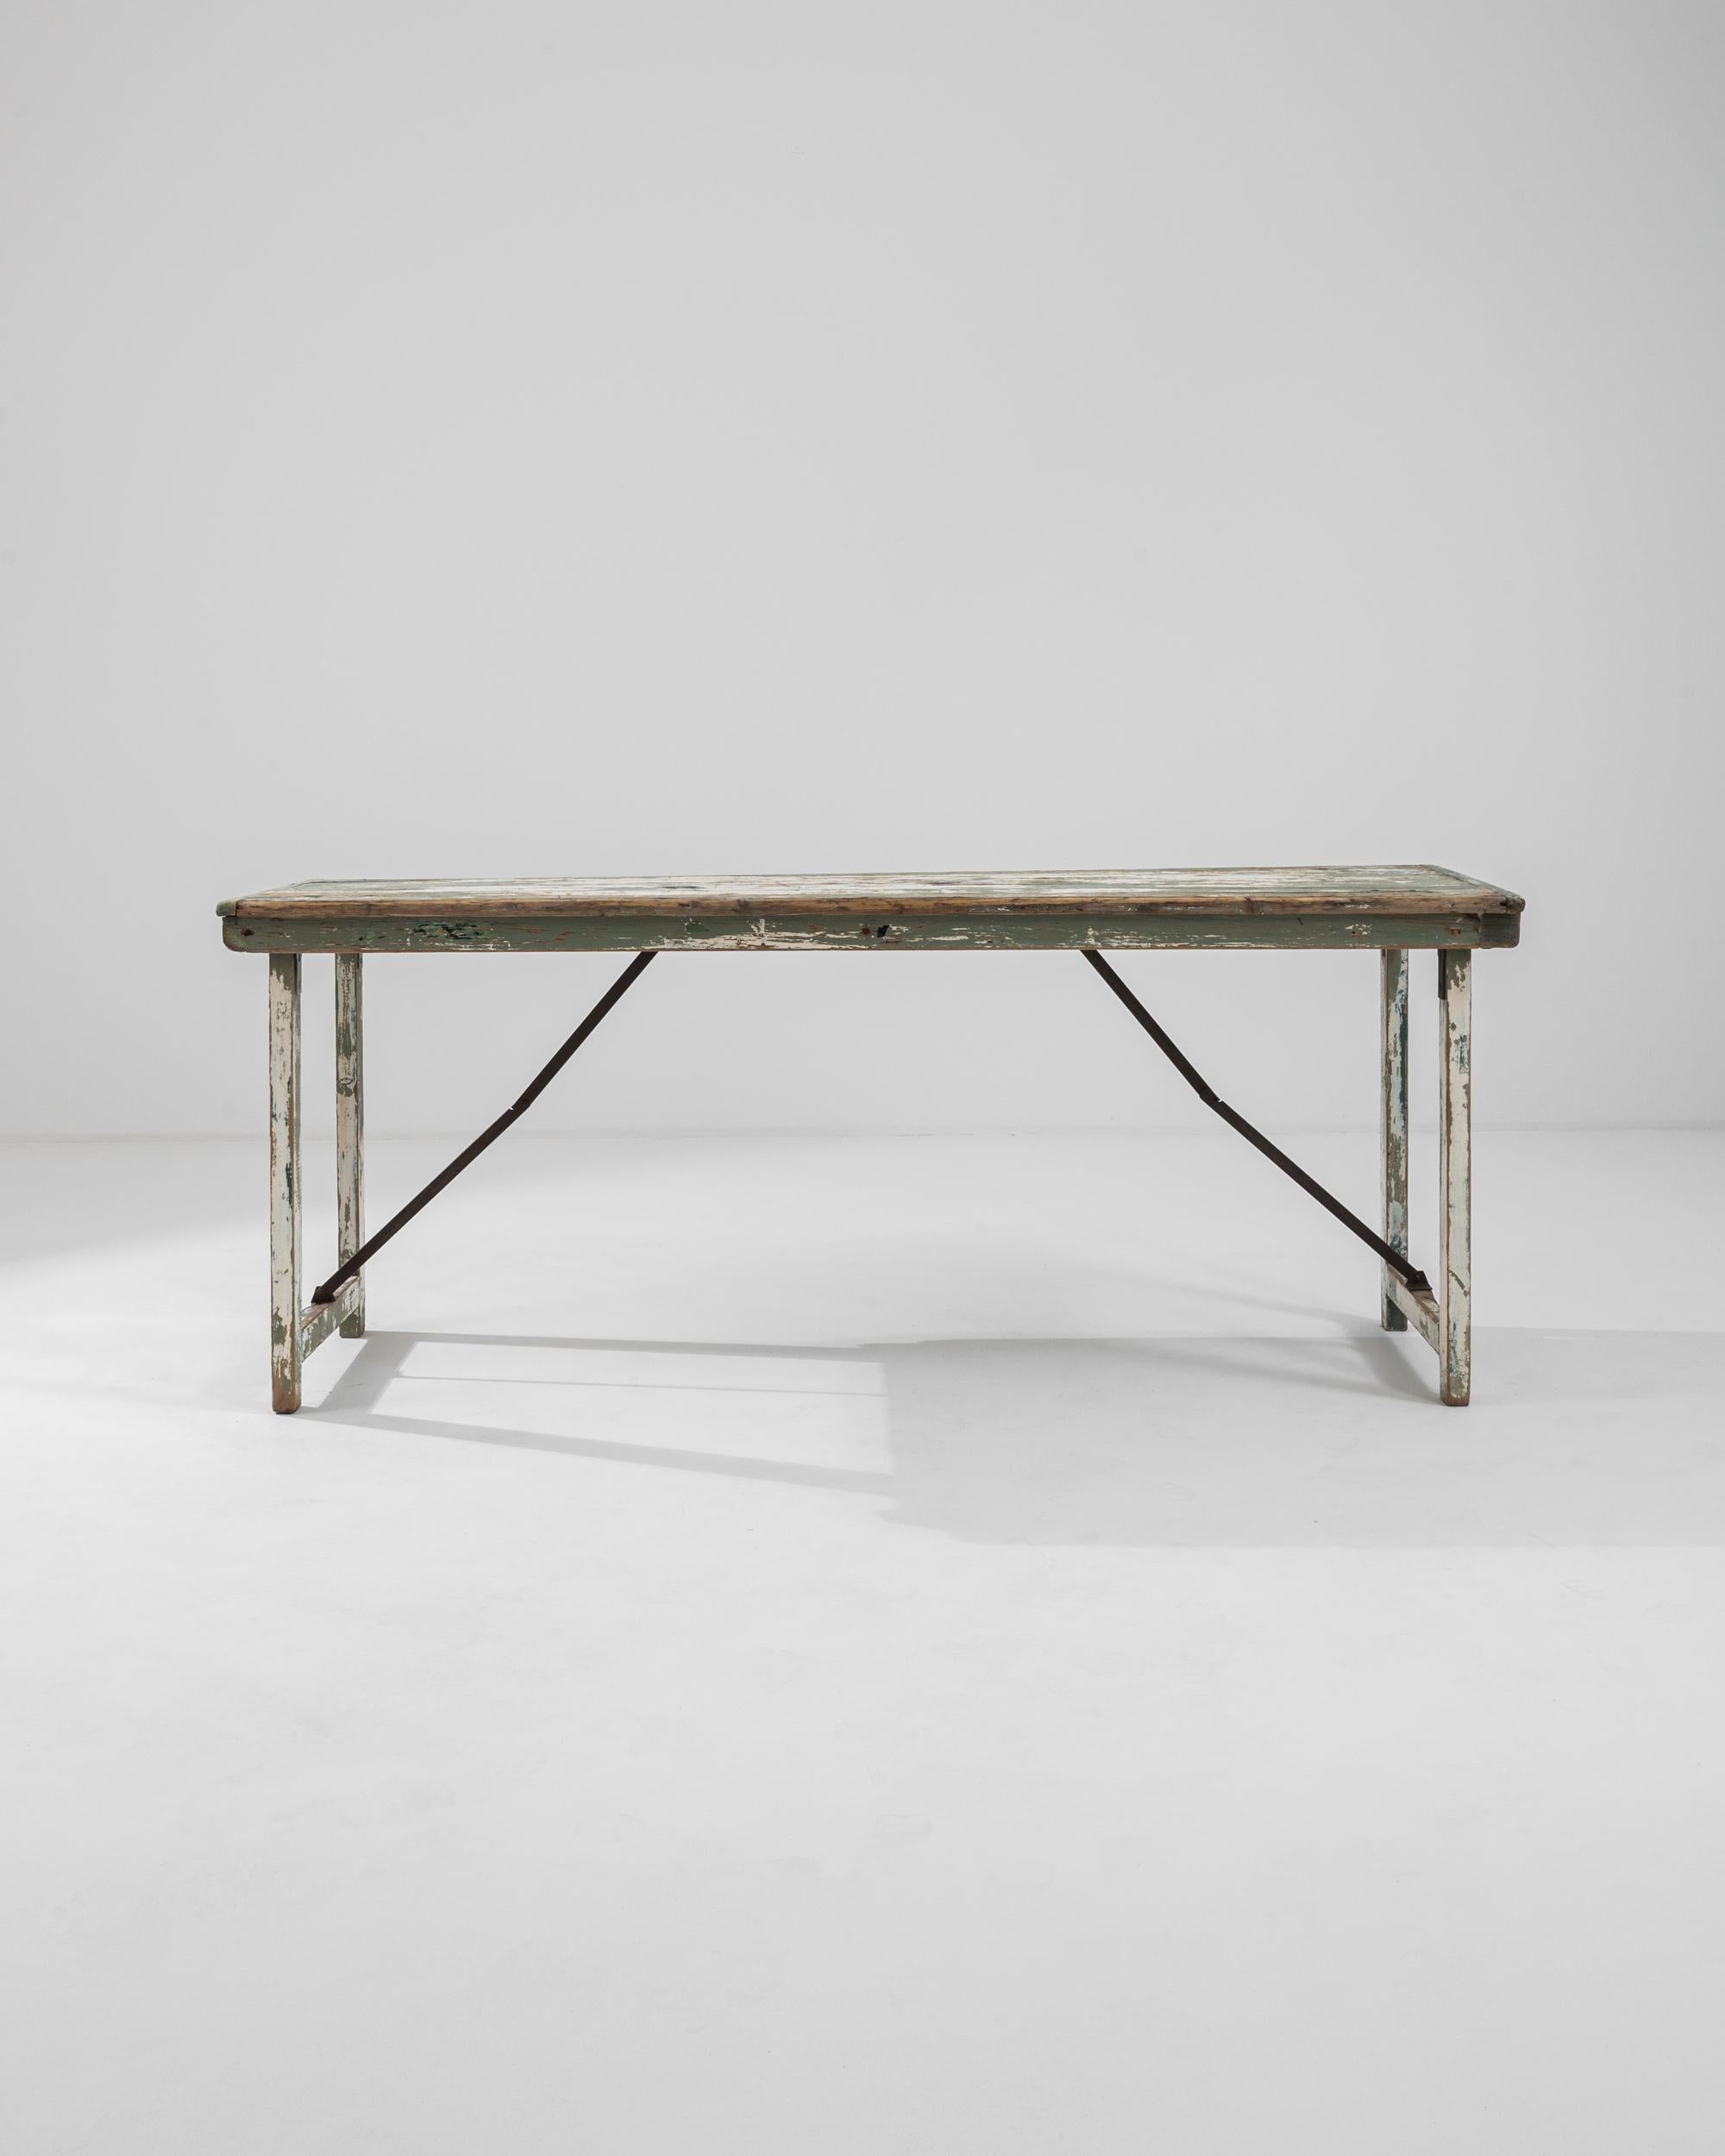 A wooden and metal dining table created in 20th century France. With a simple yet eye-pleasing design, and a delightfully colored surface, this expansive table easily unfolds for an aesthetically pleasing picnic. The green paint that coats its